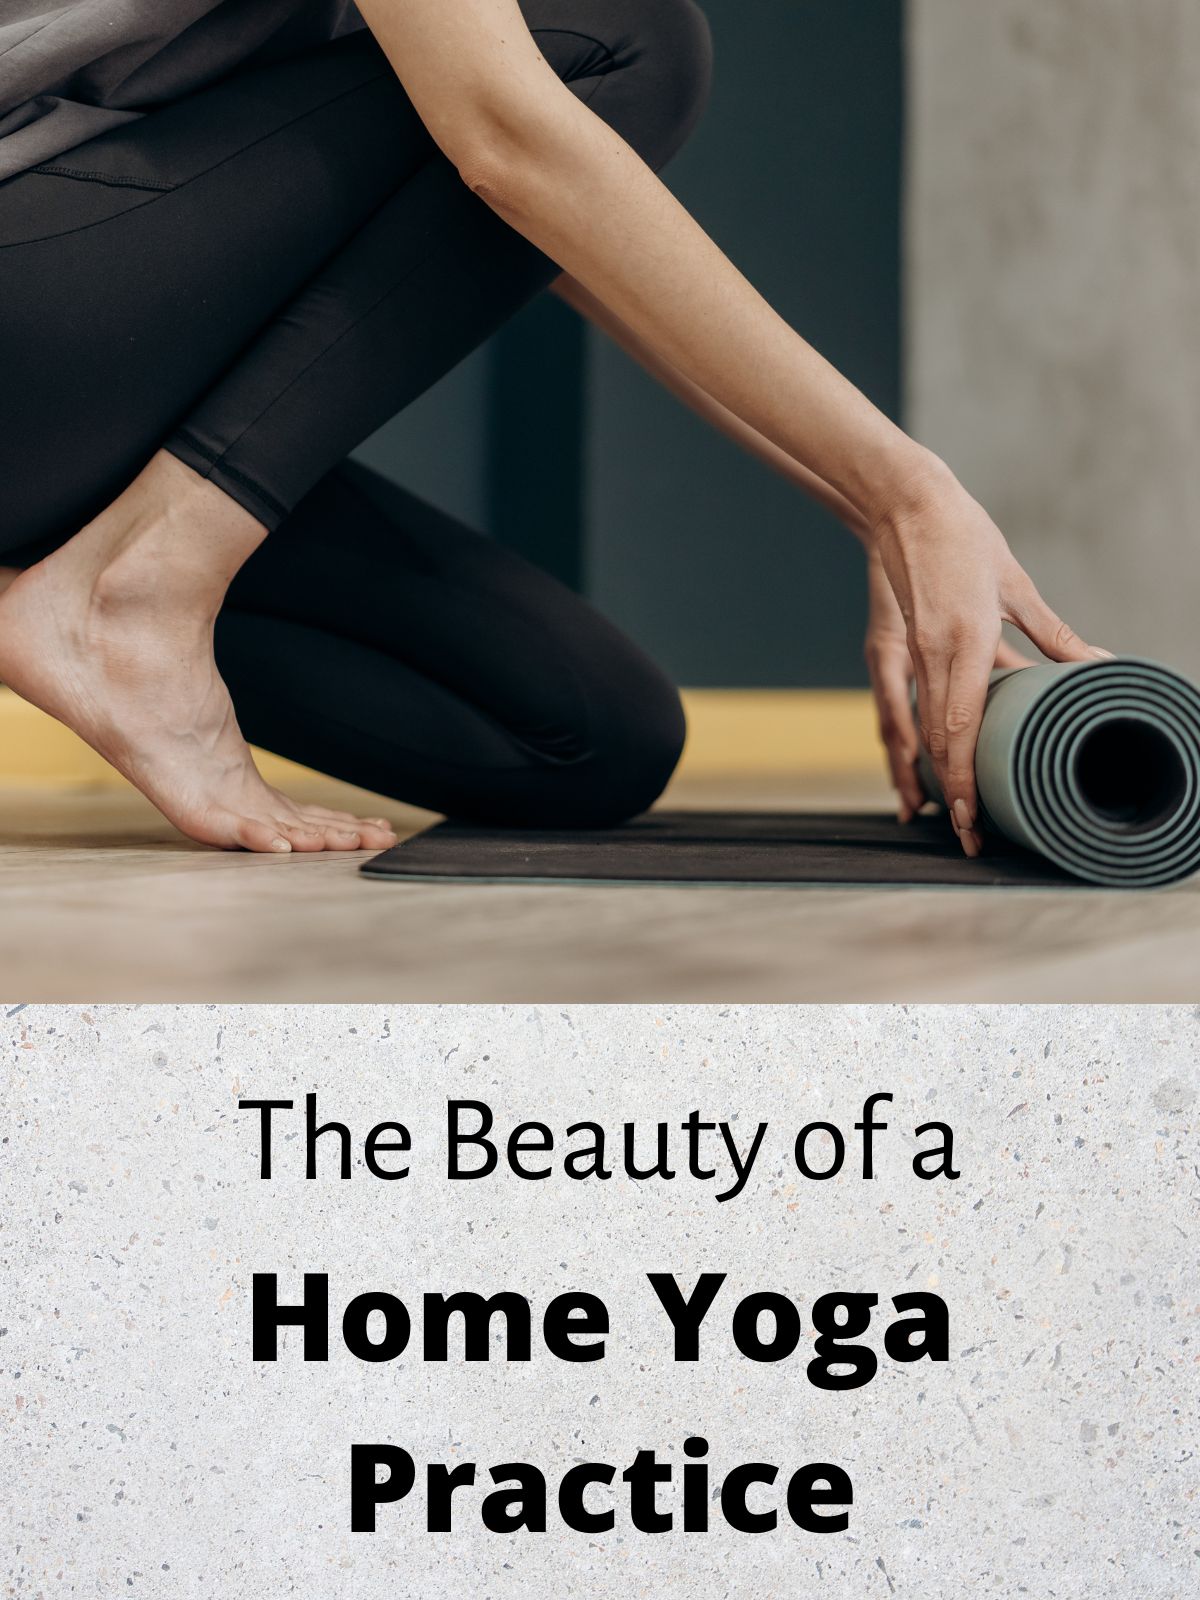 A photo of a girl unrolling a yoga mat. with the text below it: The Beauty of a home yoga practice.